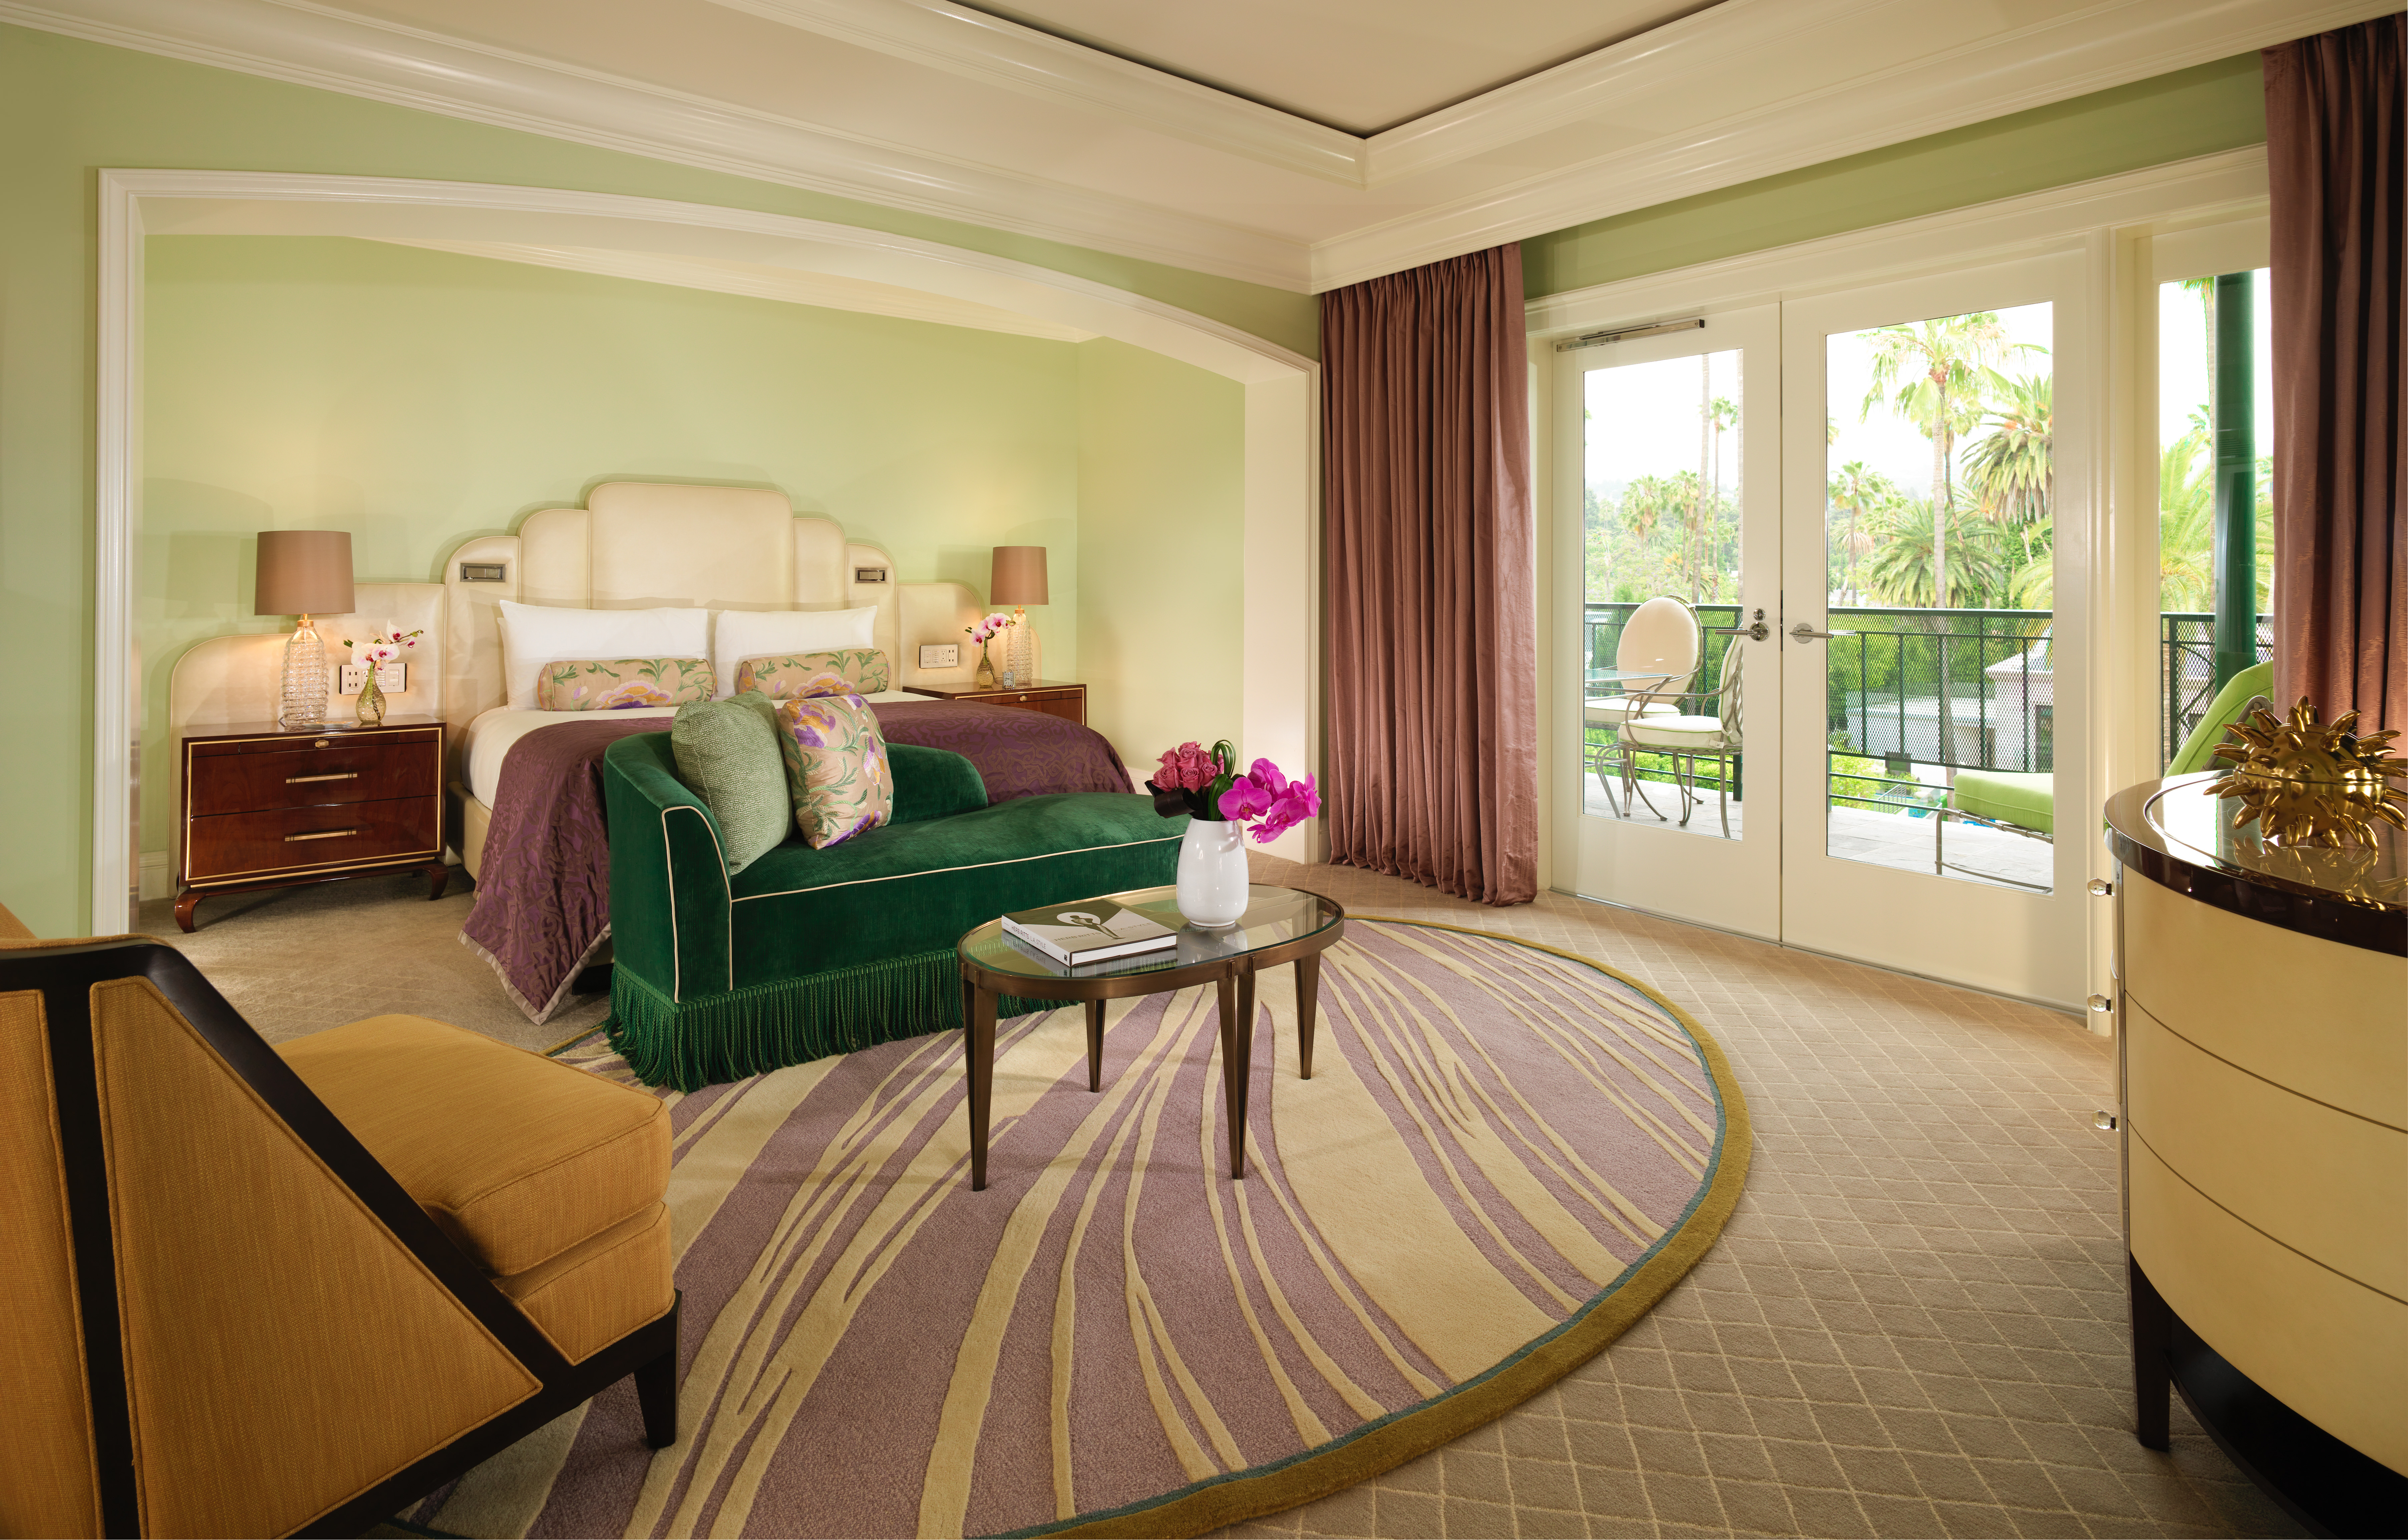 Presidential Suite Bedroom at the Beverly Hills Hotel